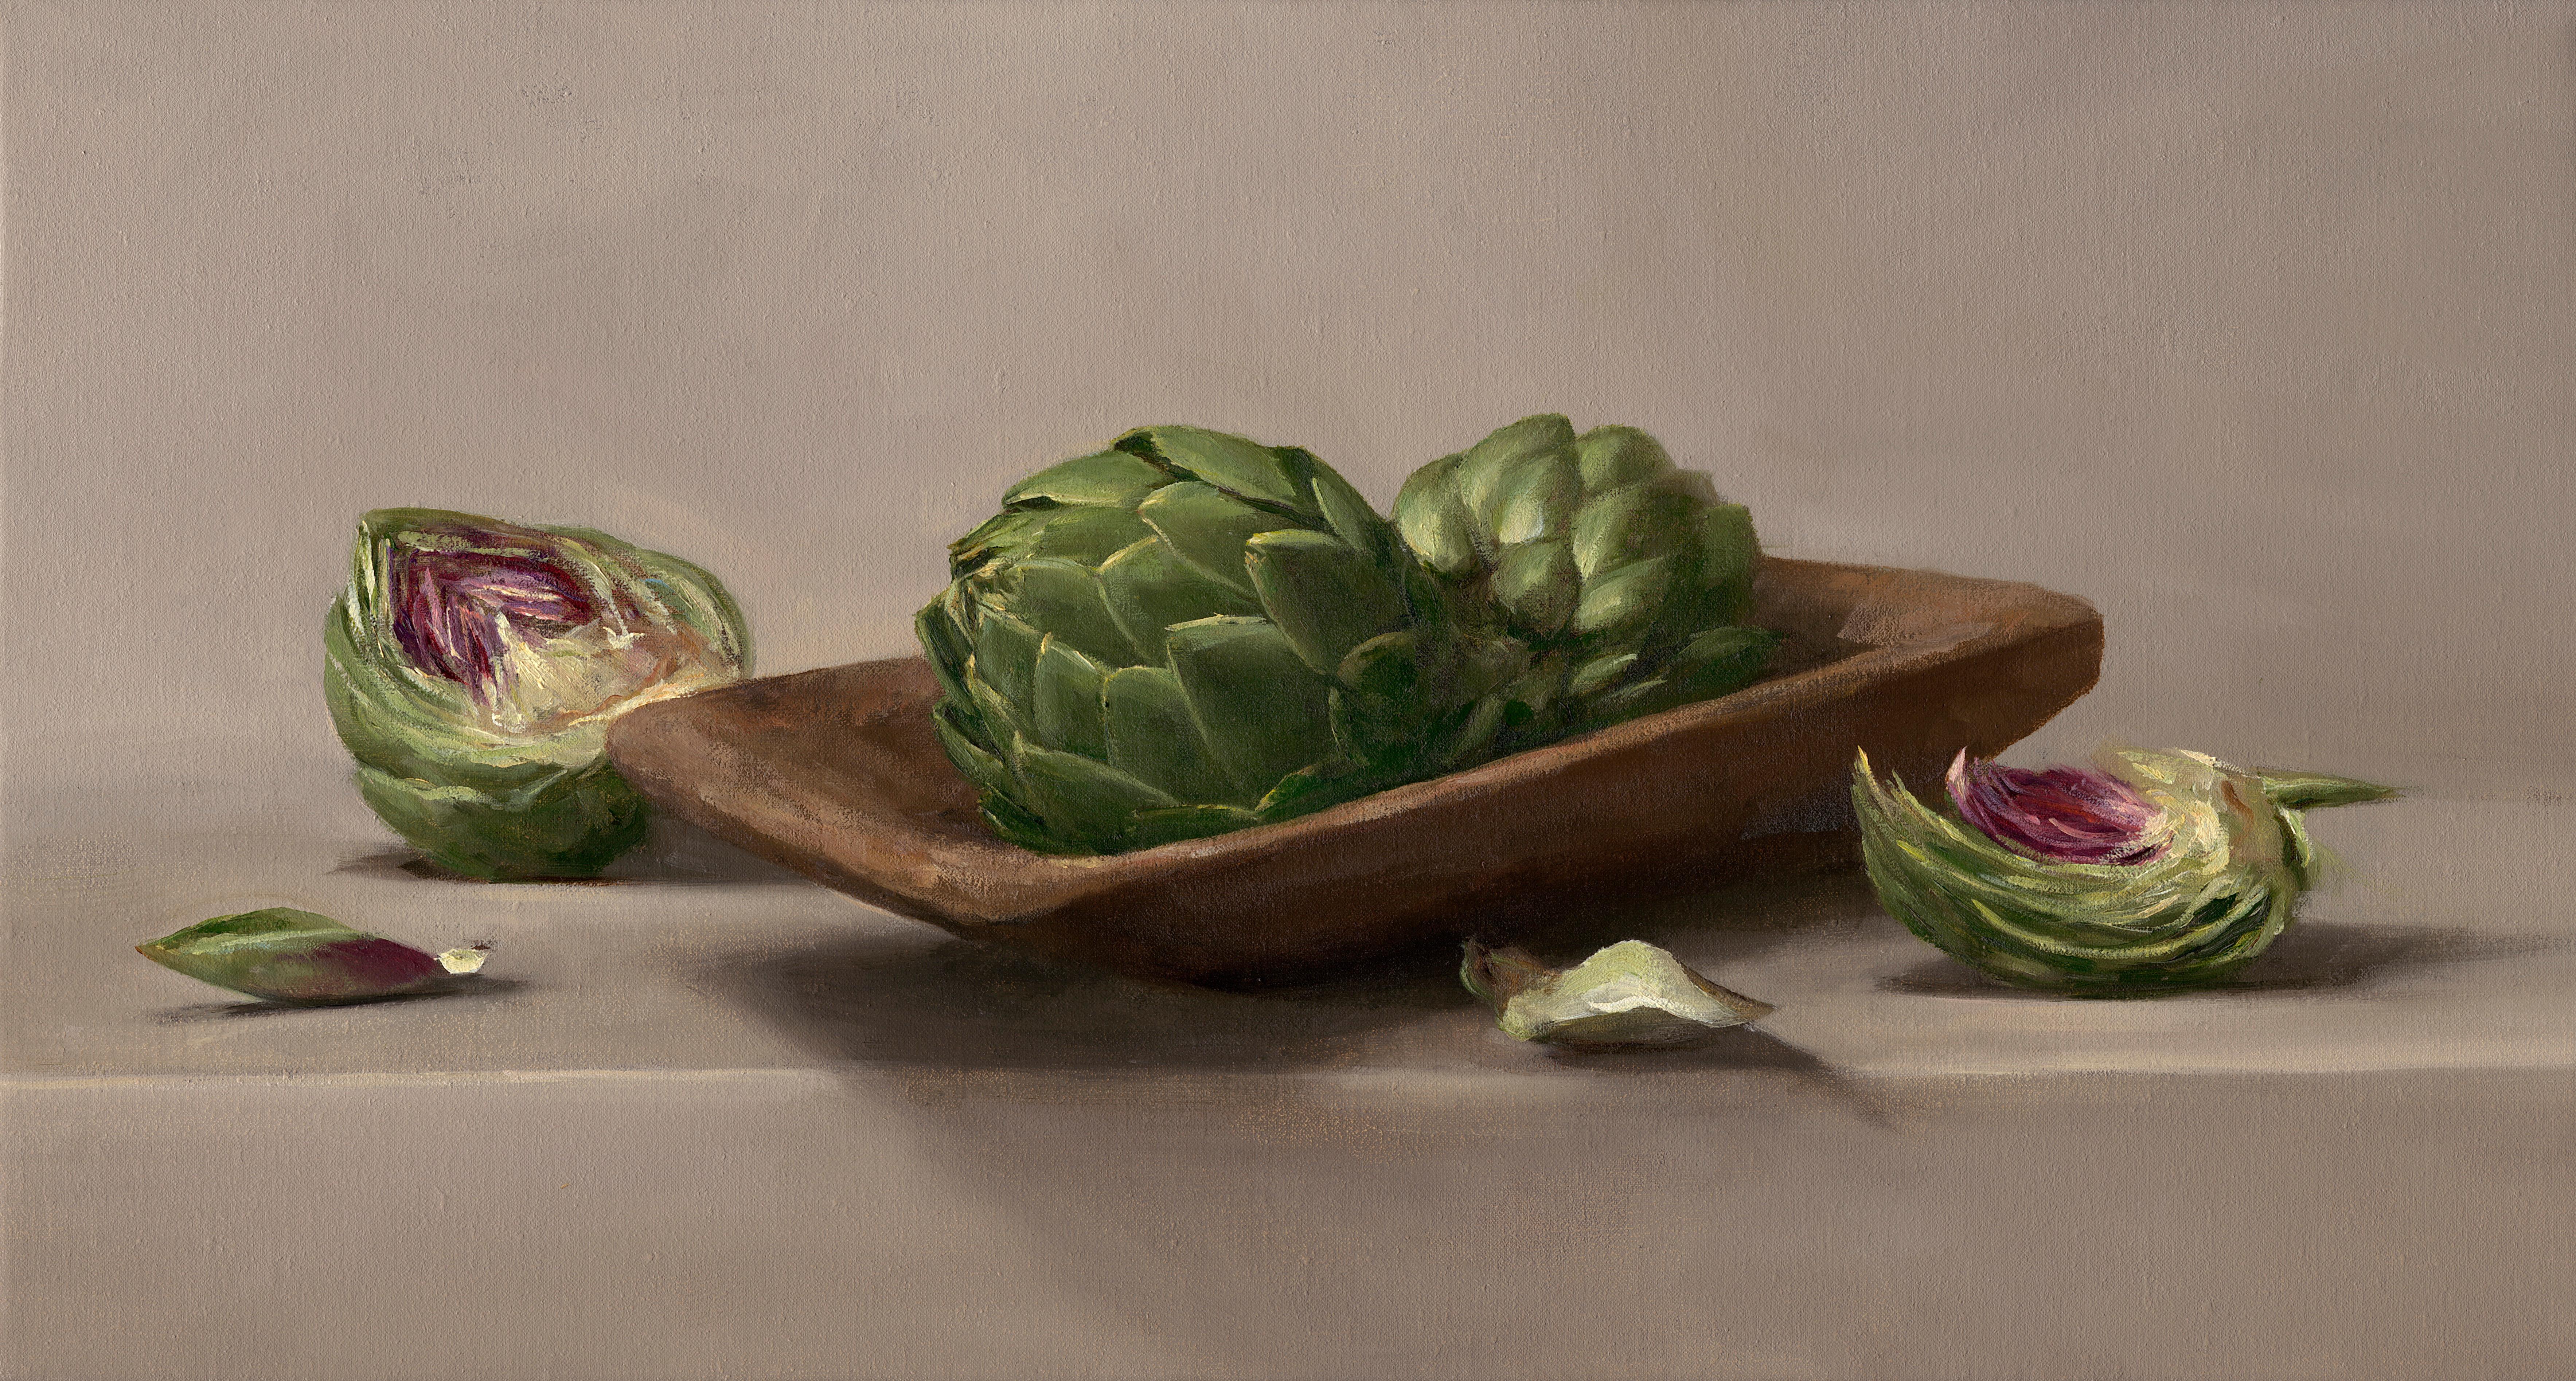 "Artichokes" contemporary realist oil painting still life, green and purple hues